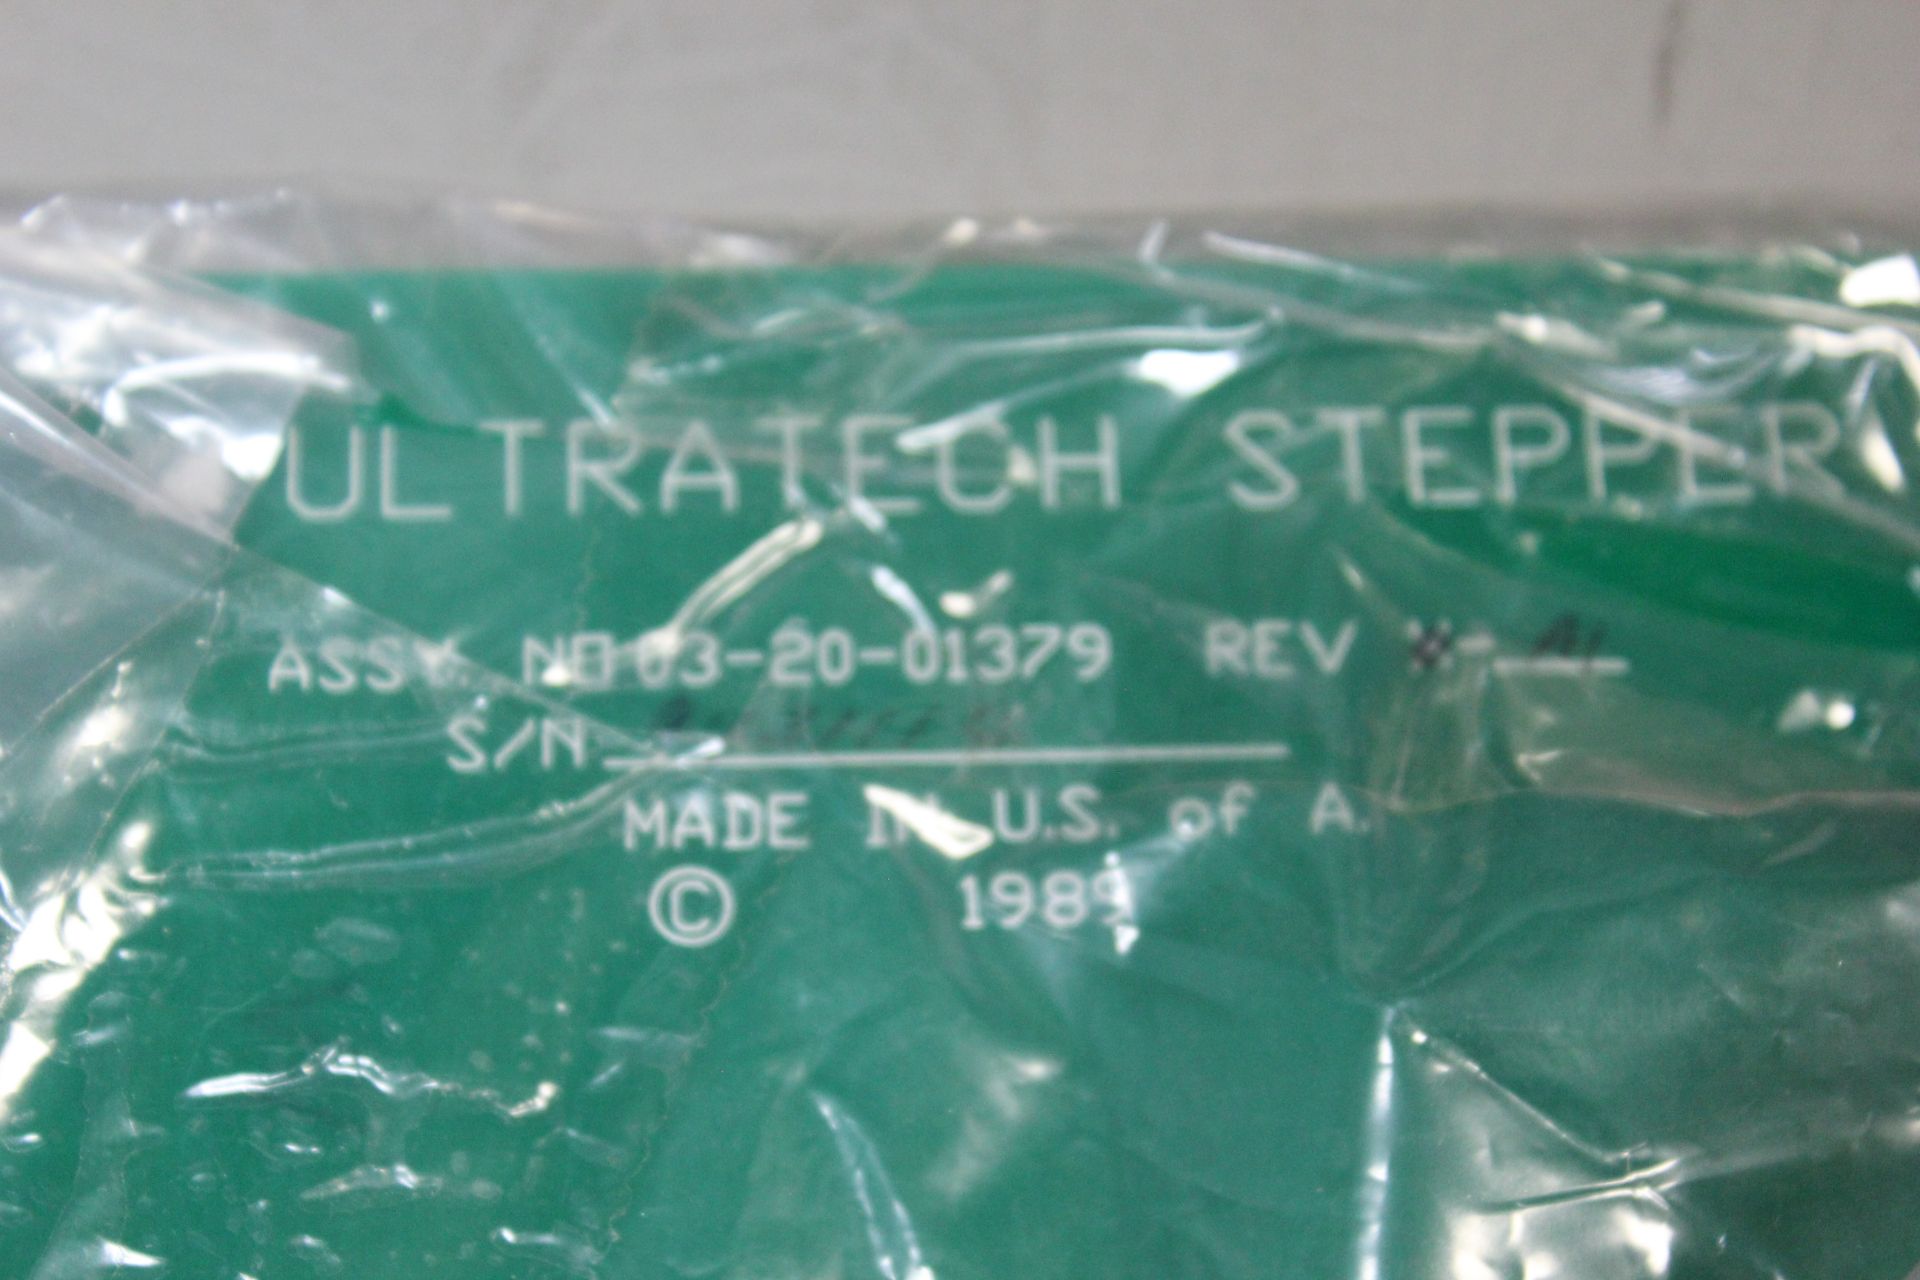 ULTRATECH STEPPER COMPUTER PRODUCTS - Image 3 of 5